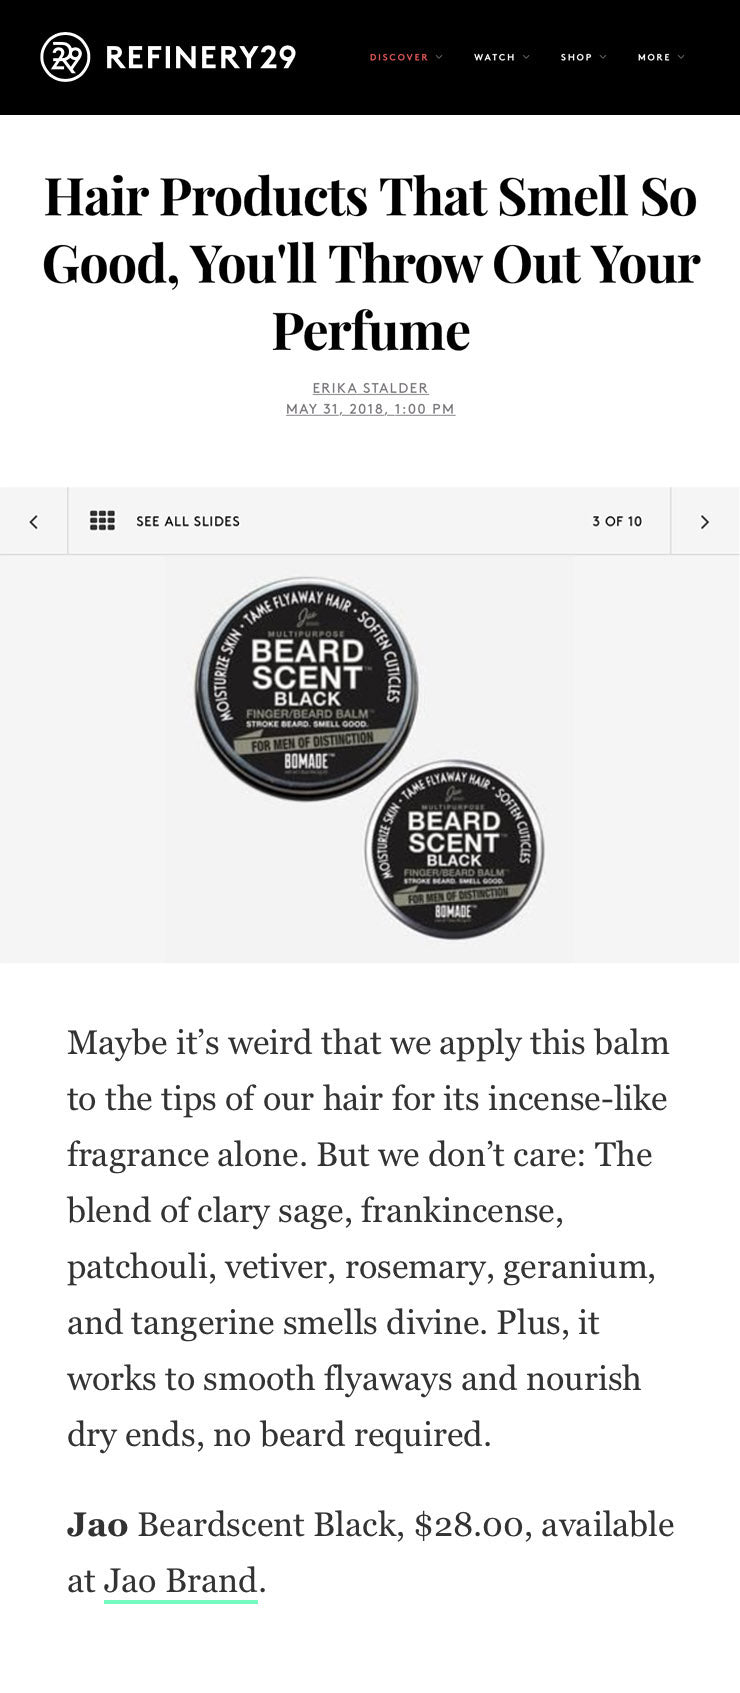 Refinery 29: Hair Products That Smell So Good, You'll Throw Out Your Perfume - Jao Brand BeardScent Black